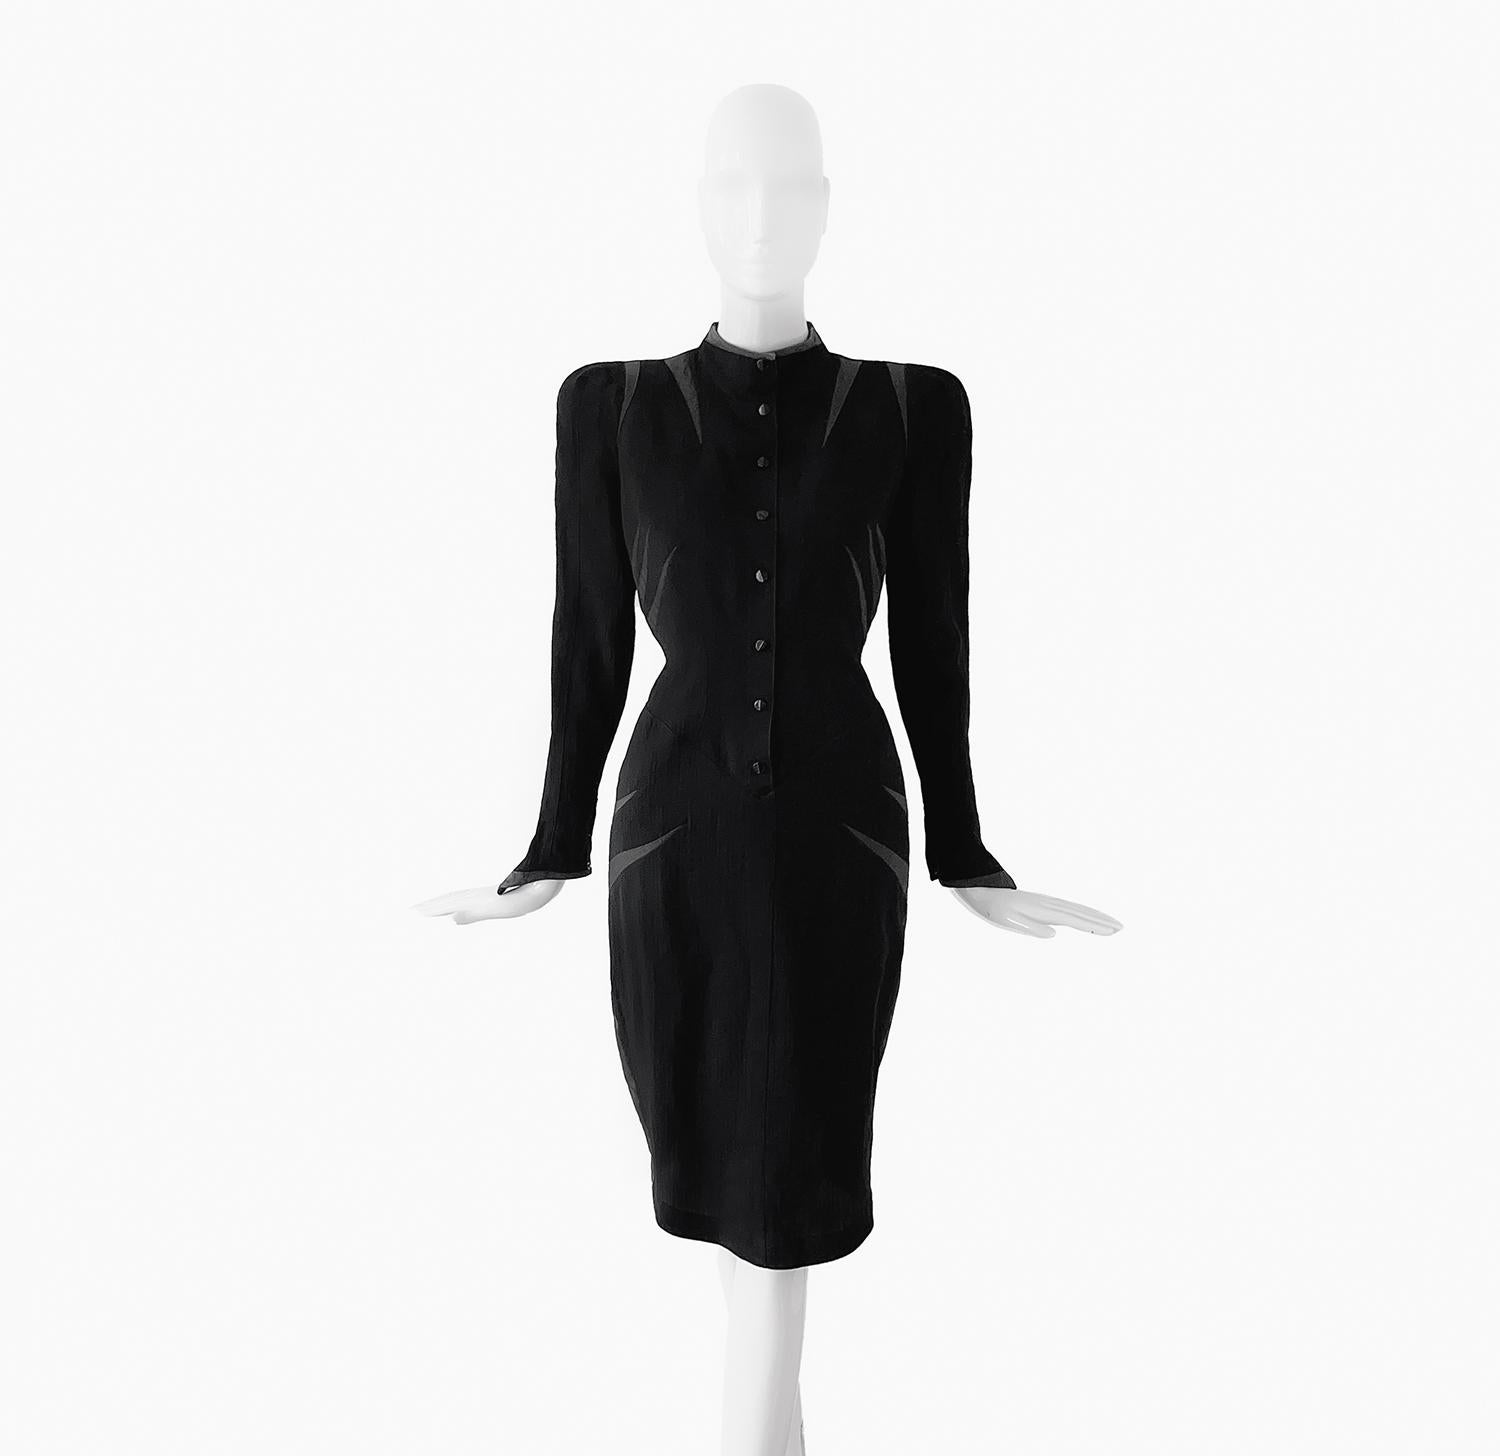 
Gorgeous extremely rare Thierry Mugler dress, Spring Summer 1988 Collection. Dramatic schulptural femme fatale dress with strong shoulders, high neck and Silk stripe details. A very rare creation of Thierry Mugler's early Collections, typical